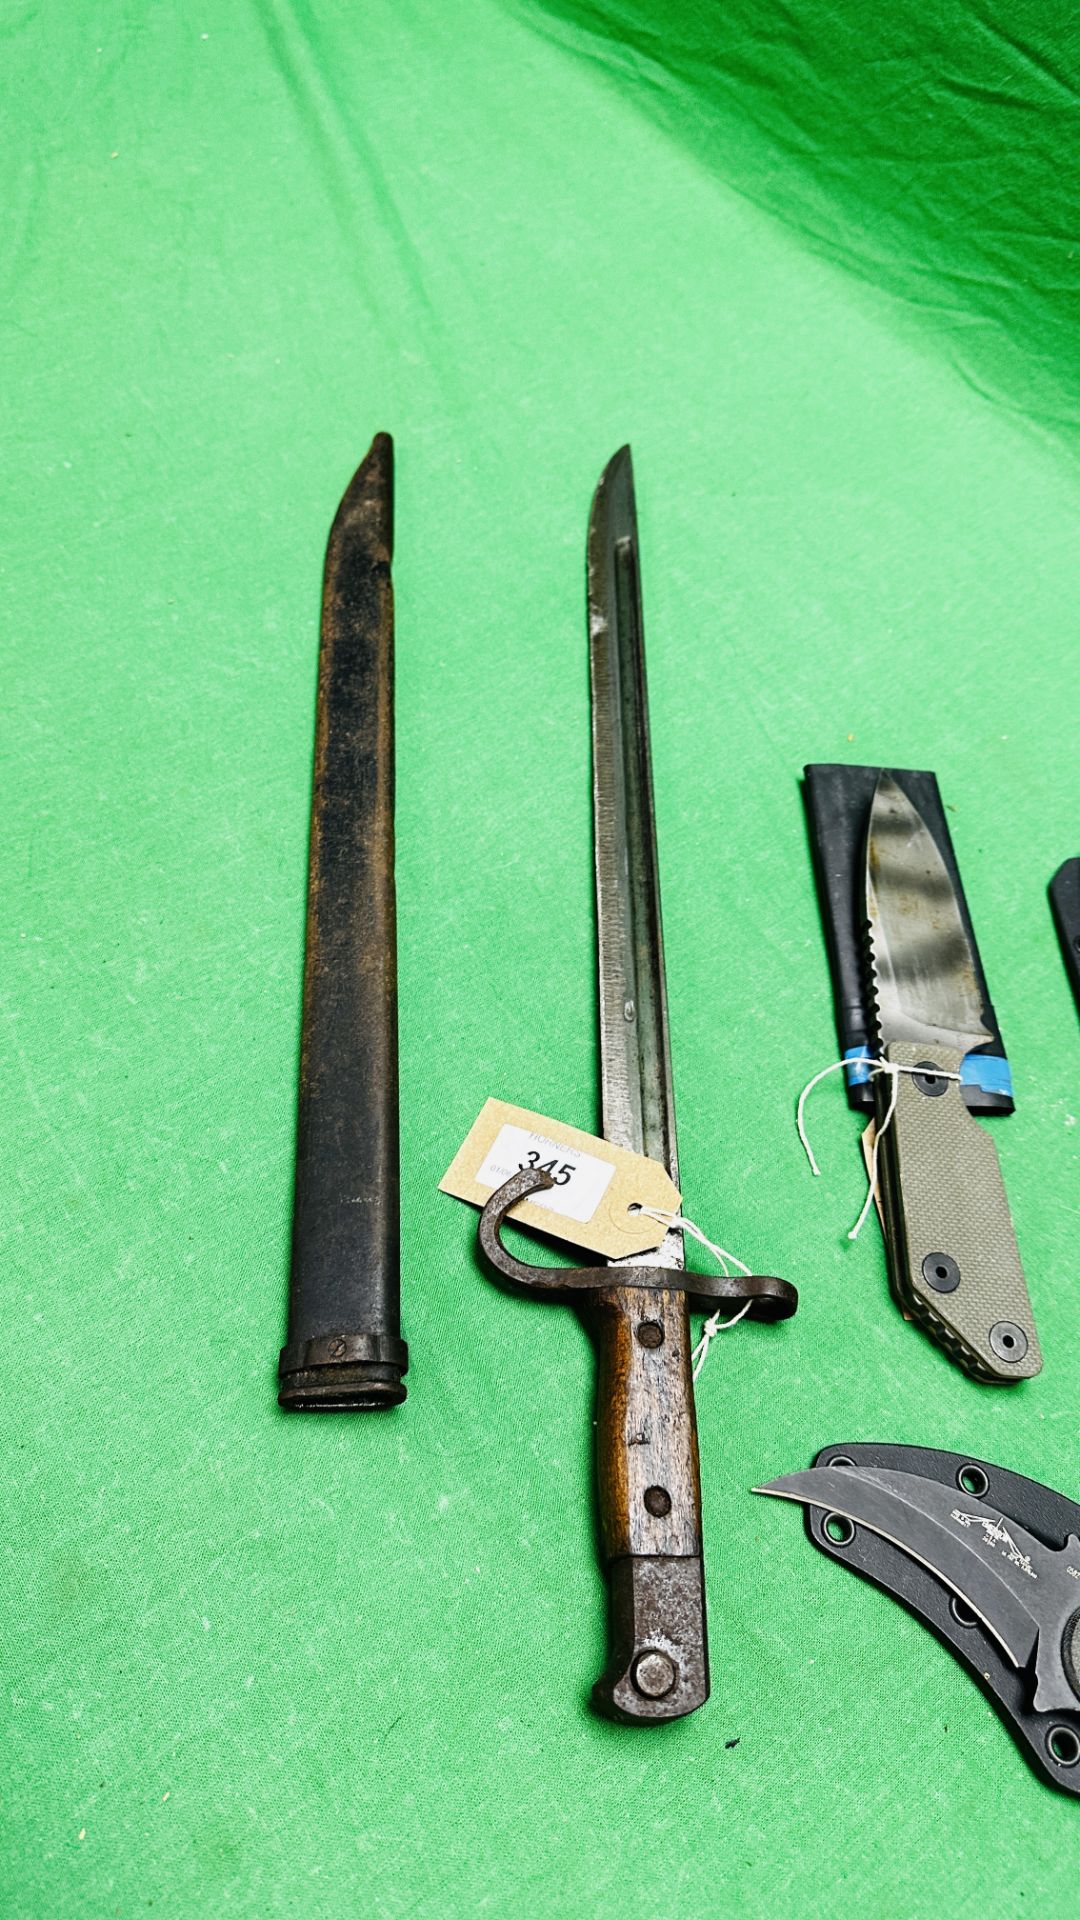 AN ANTIQUE FRENCH BAYONET WITH SCABBARD ALONG WITH THREE VARIOUS KNIVES INCLUDING EMERSON, STRIDER, - Image 7 of 7